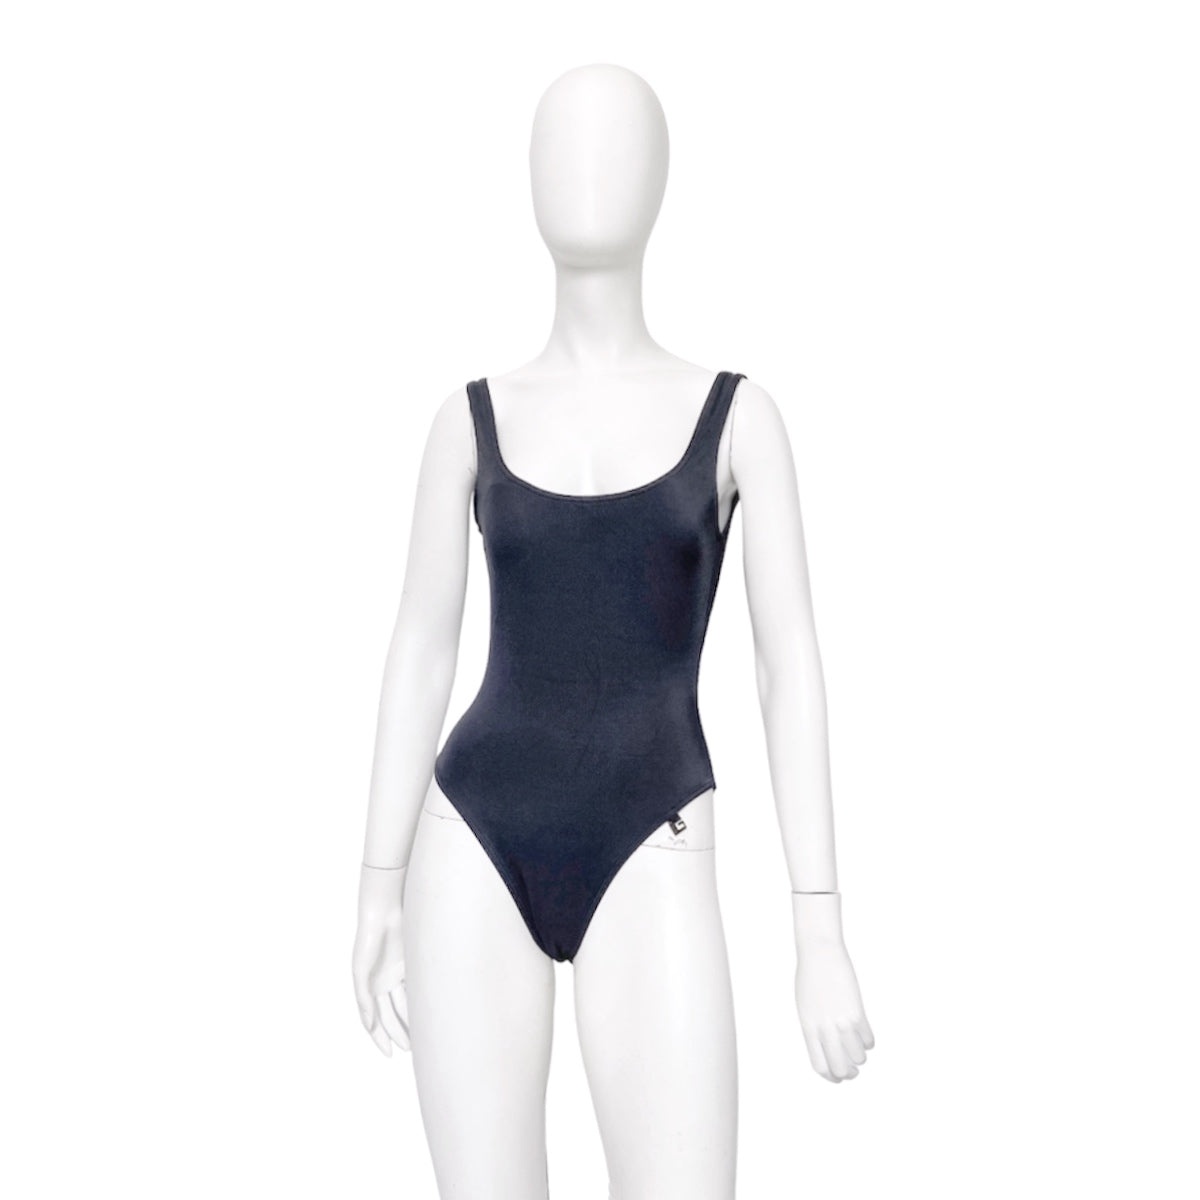 BWNT Gucci Spring 1999 Tom Ford Plunging Backless Navy One-Piece Swimsuit - 1